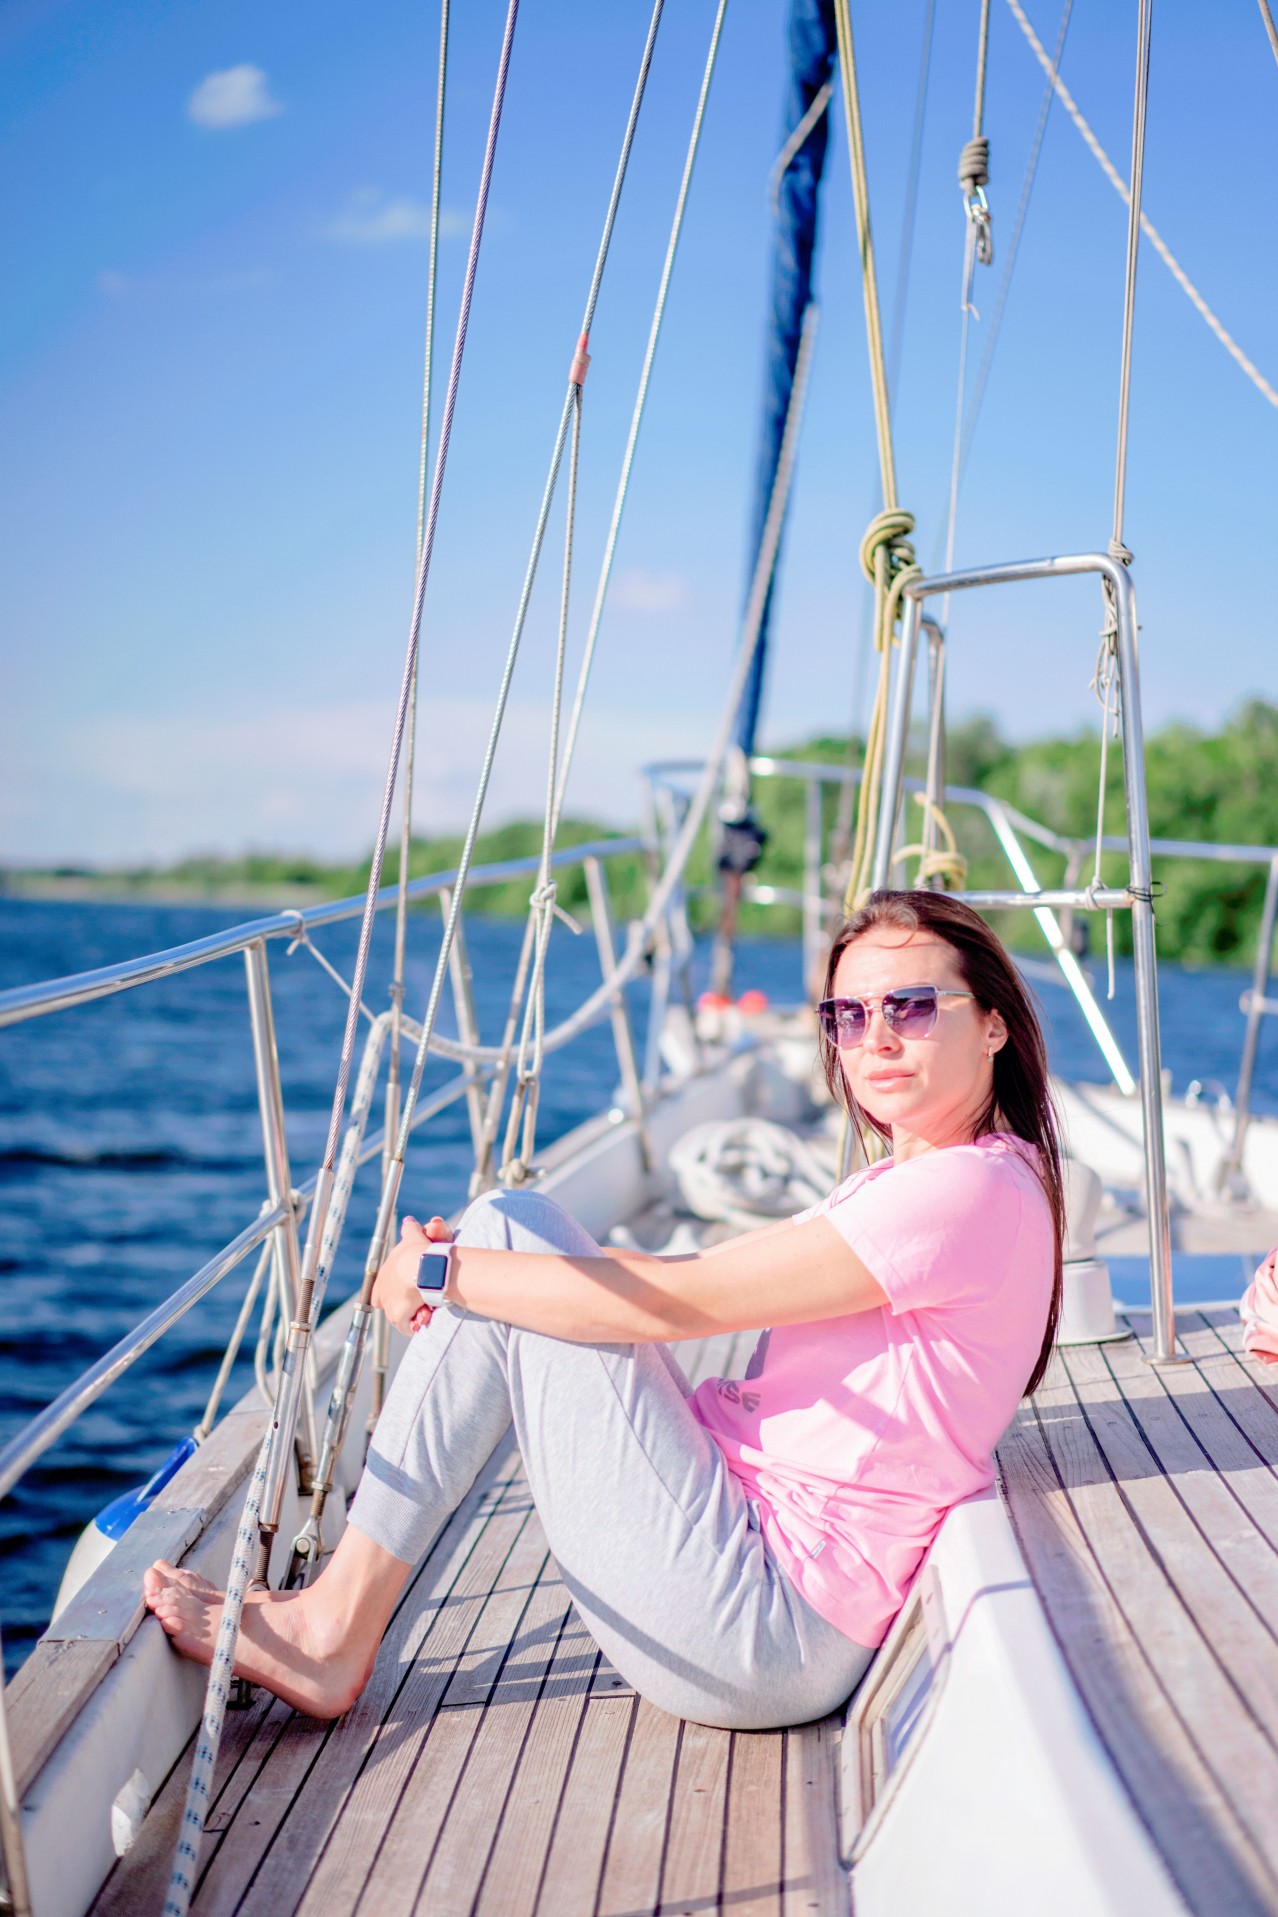 Young Girl on the Deck of a Sailing Boat